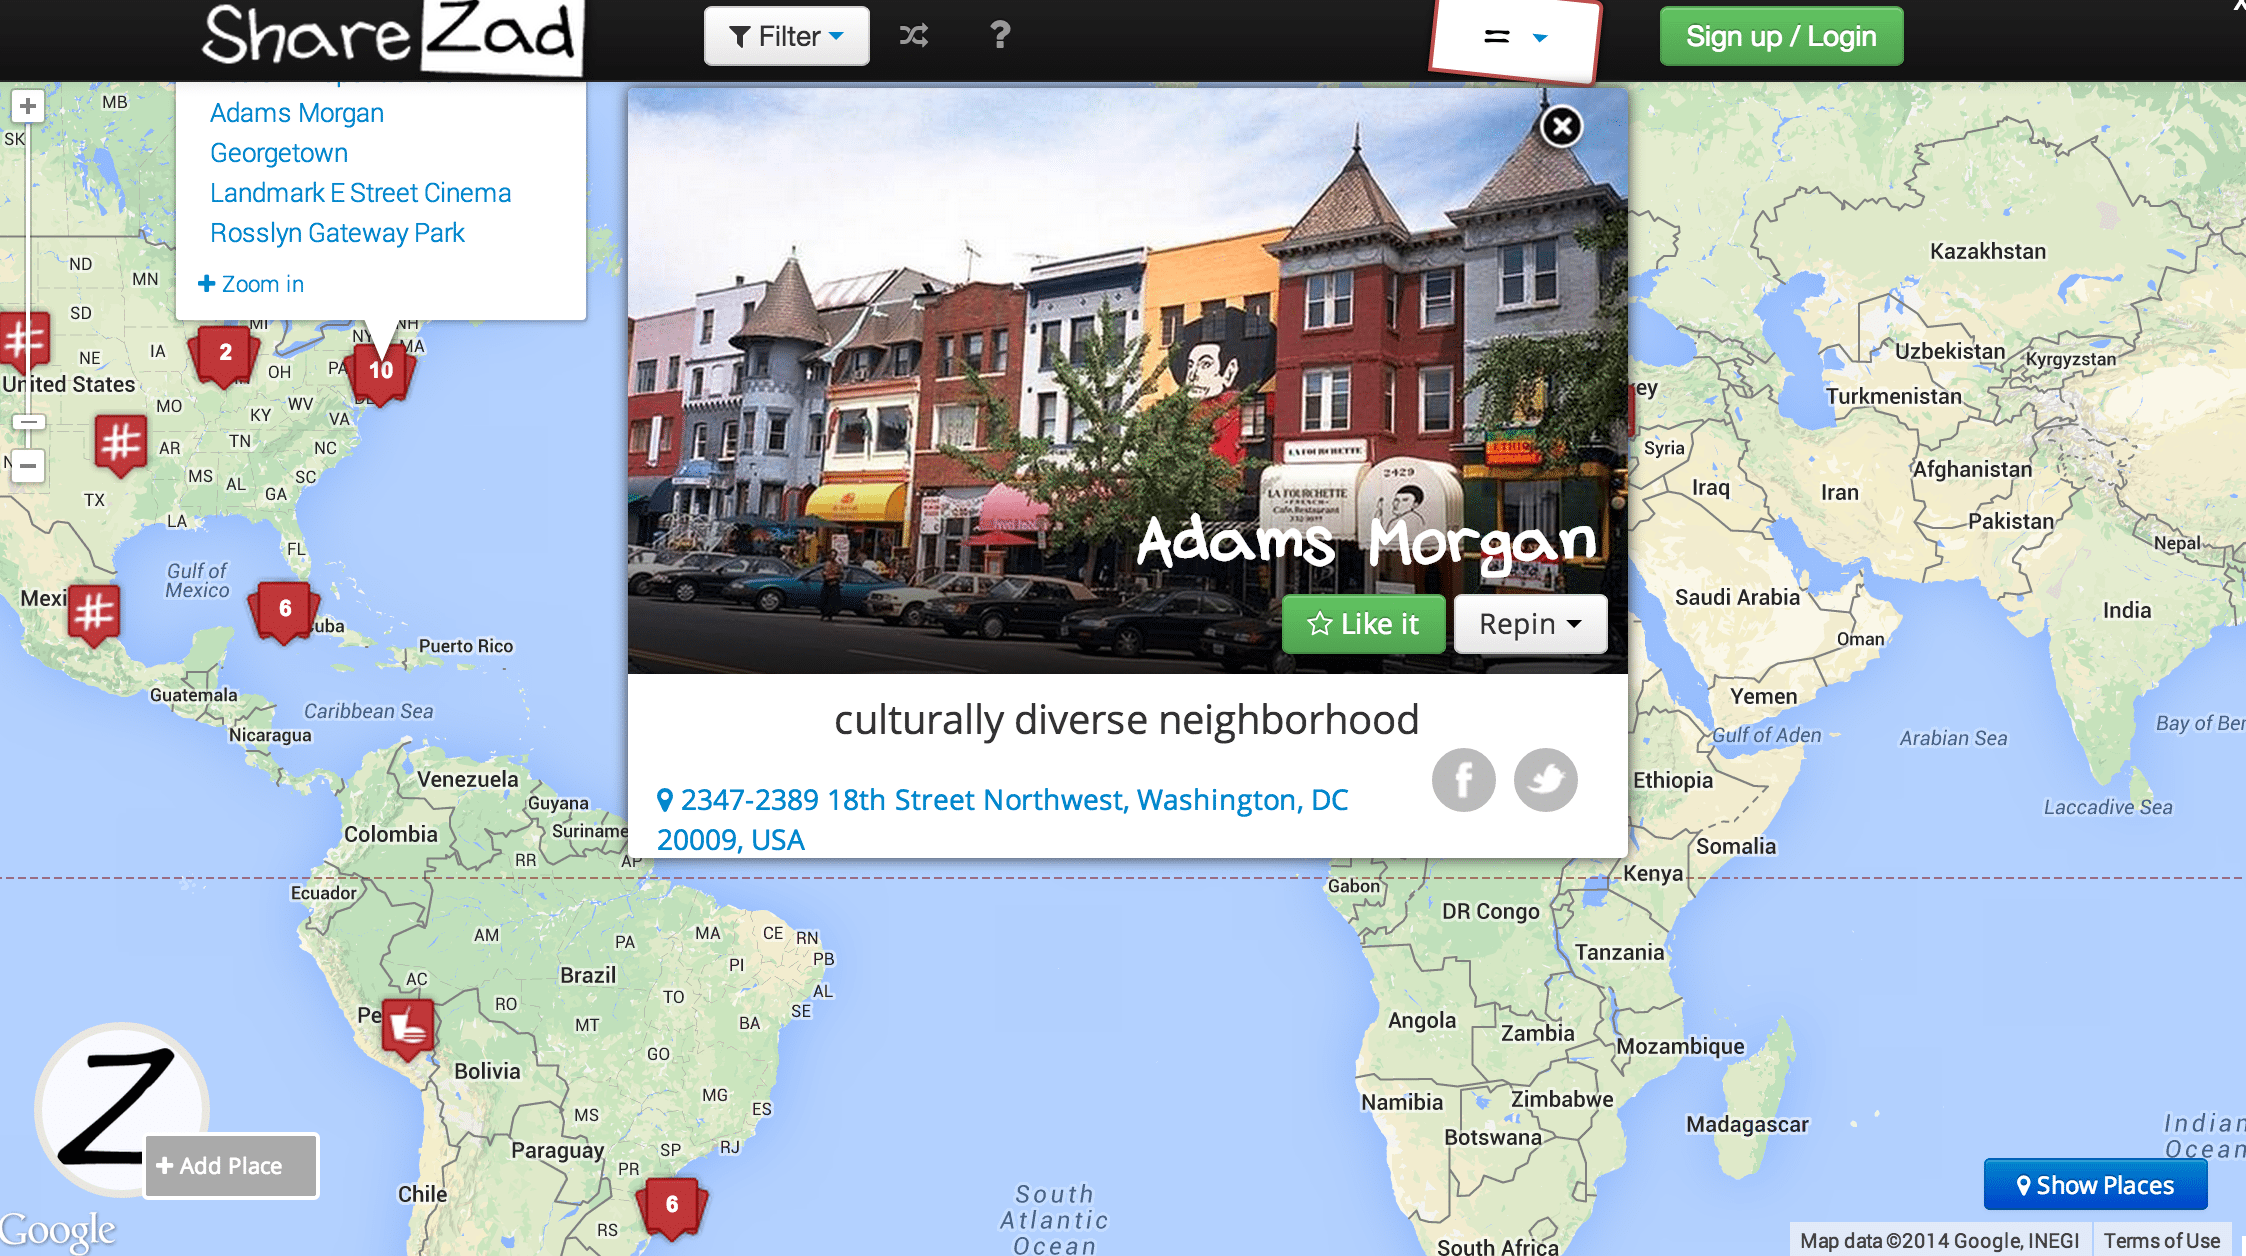 ShareZad is a tool for discovering local places to go according to your friends.